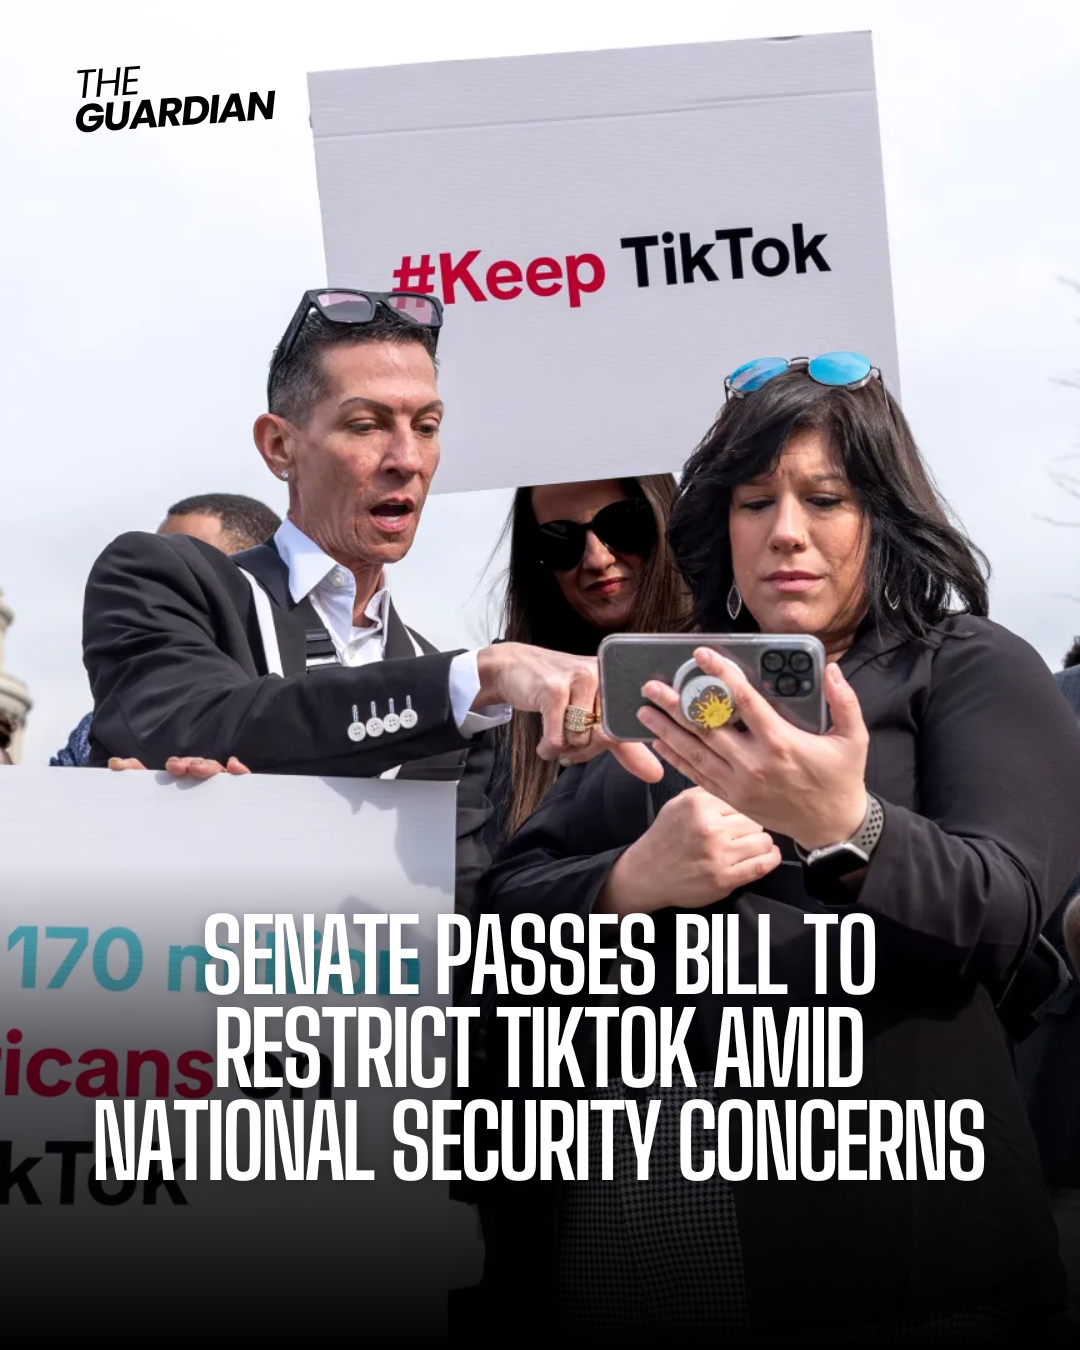 The Senate's ratification of a bill targeting TikTok represents a key milestone in the government's regulation of social media companies.